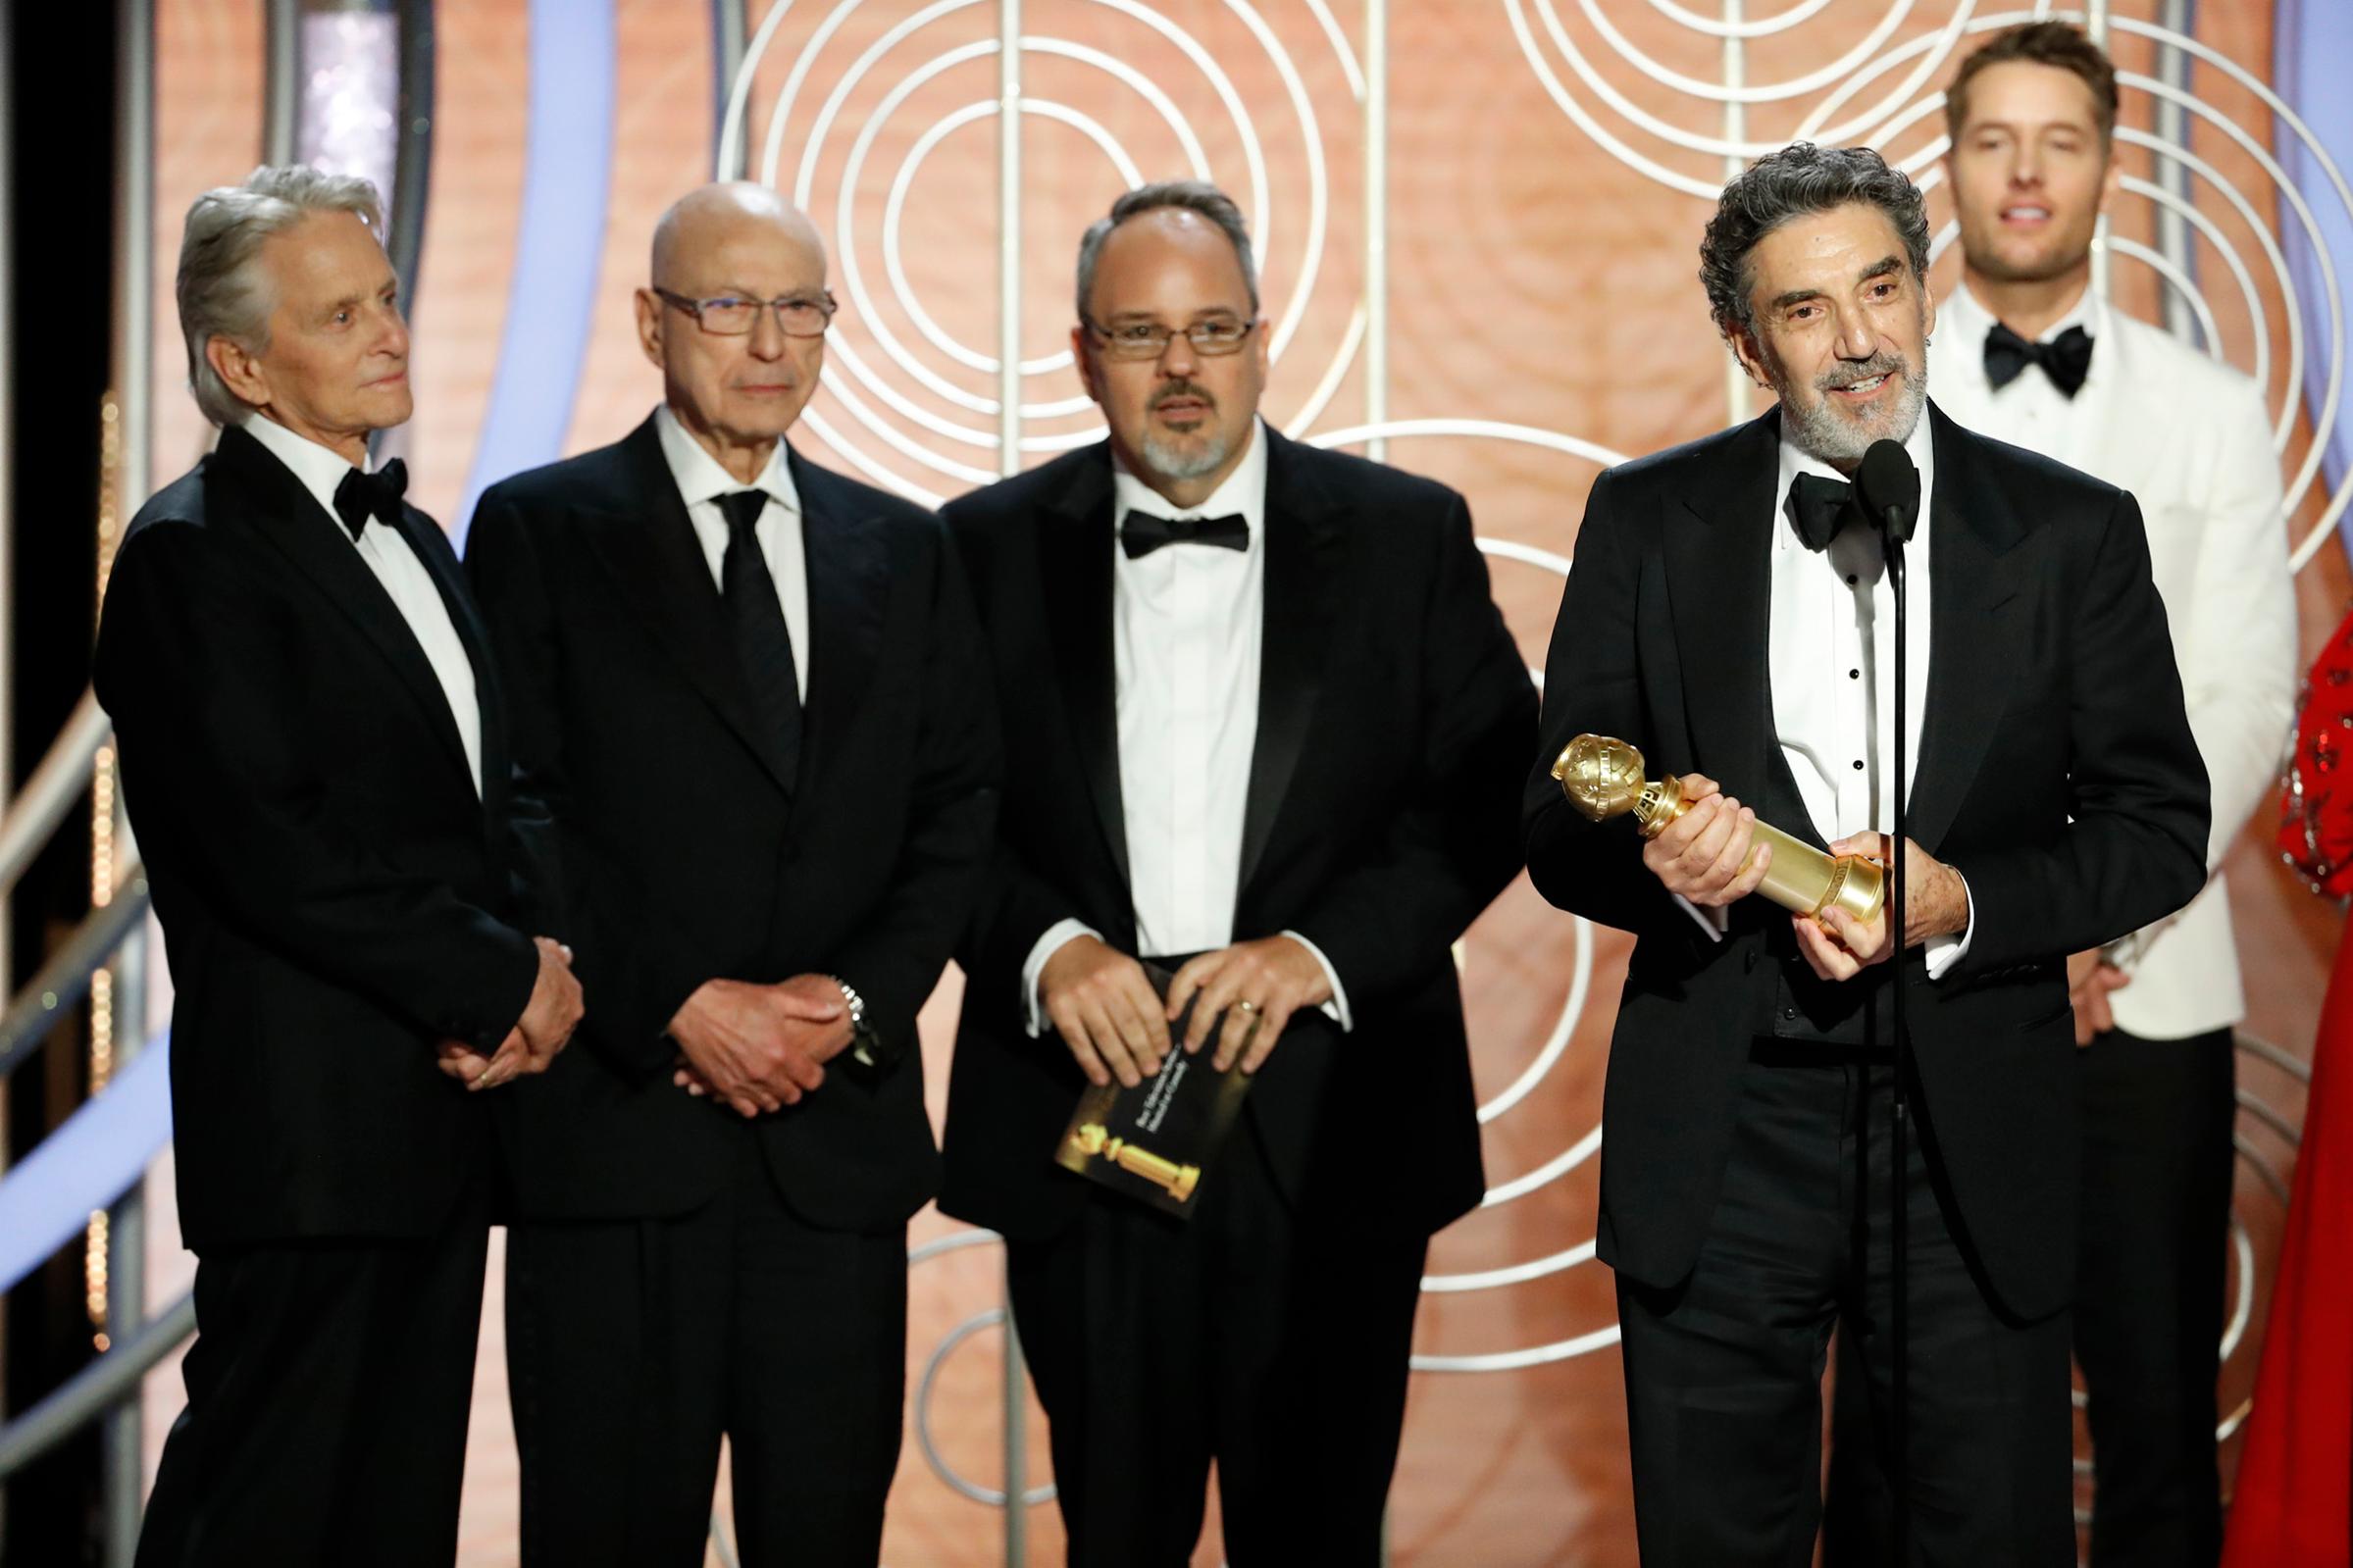 Chuck Lorre and Al Higgins of “The Kominsky Method” accept the Best Television Series – Musical or Comedy award onstage during the 76th Annual Golden Globe Awards.